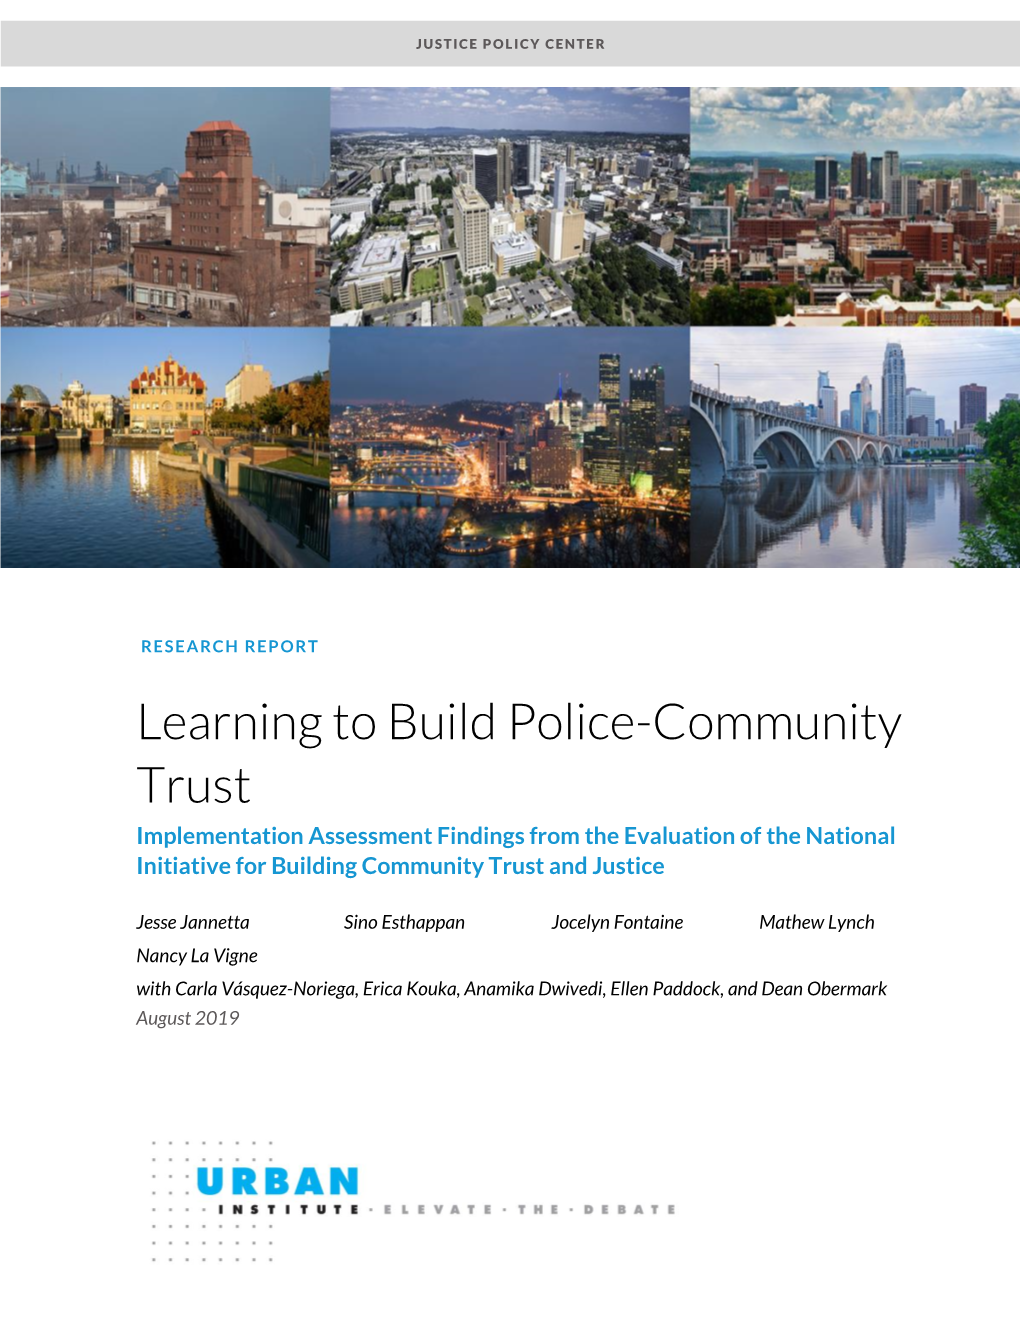 Learning to Build Police-Community Trust Implementation Assessment Findings from the Evaluation of the National Initiative for Building Community Trust and Justice